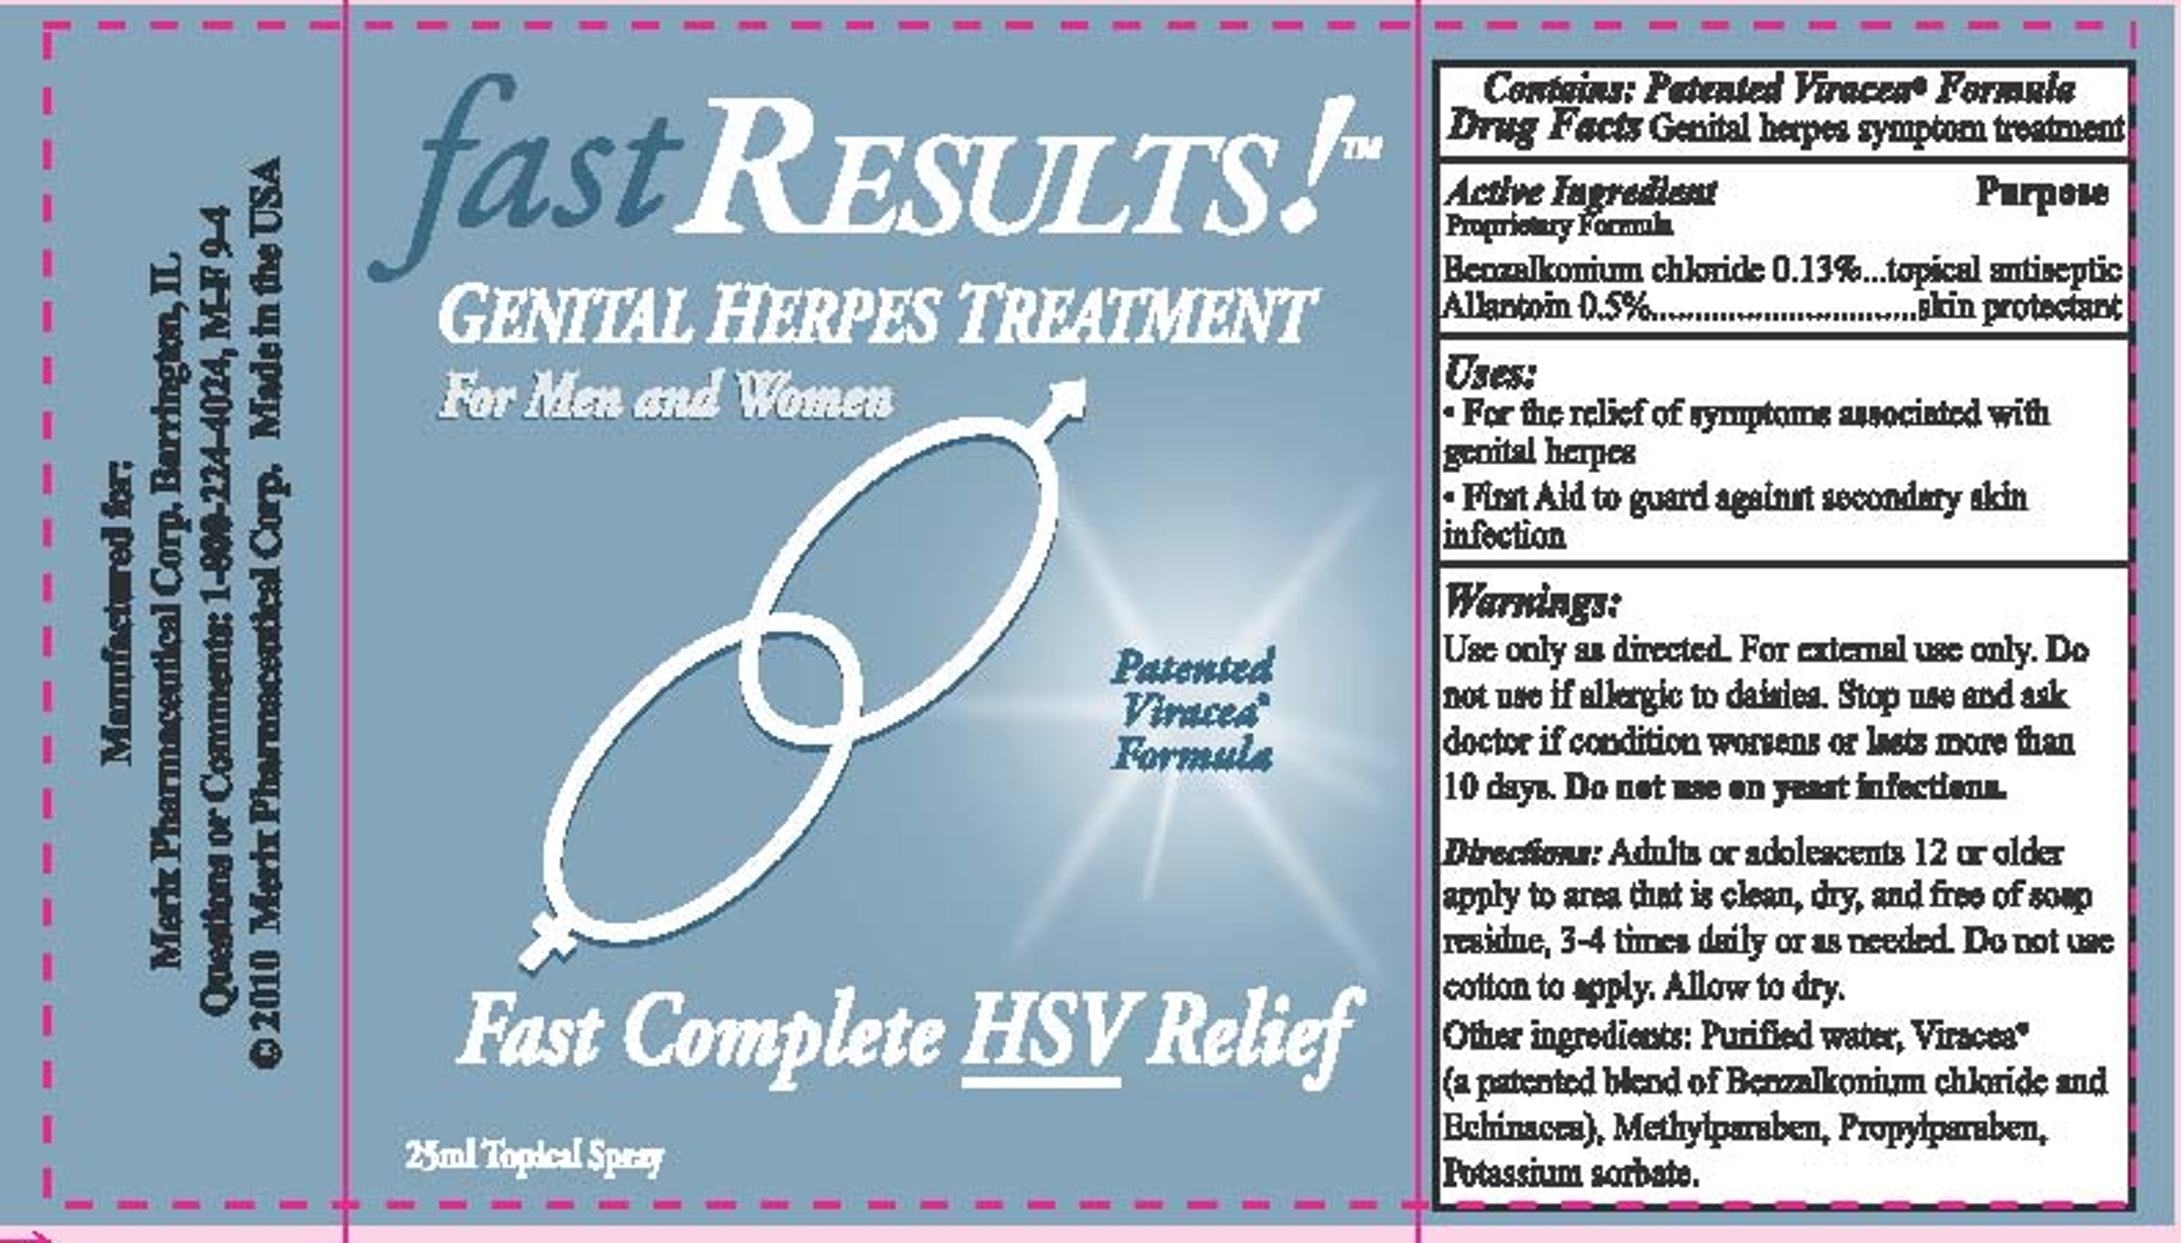 Fast Results label